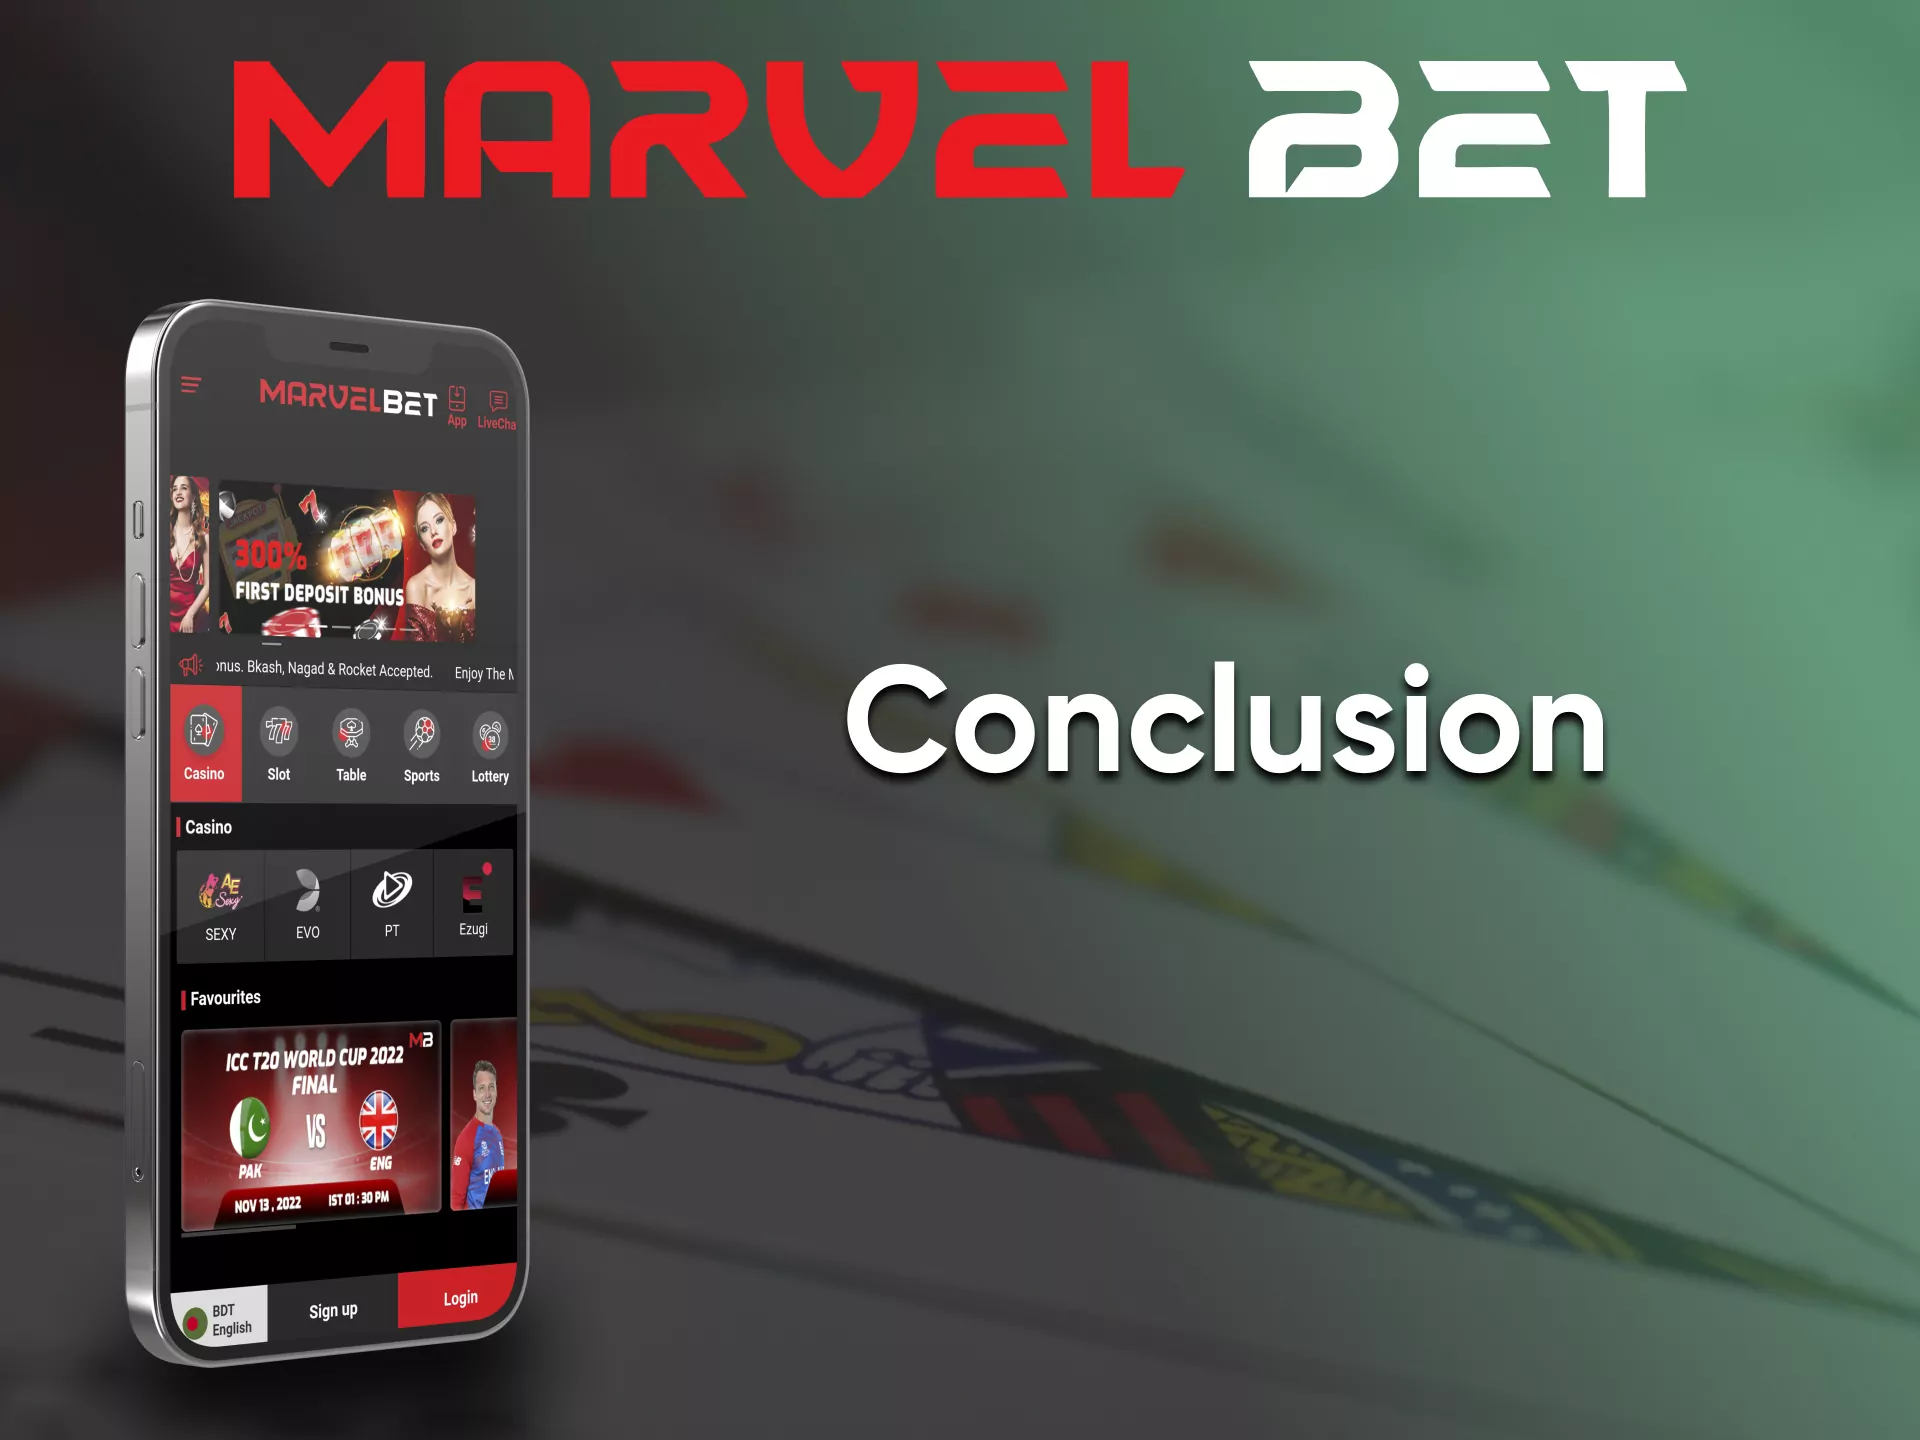 Choose the application from Marvelbet for casino games.